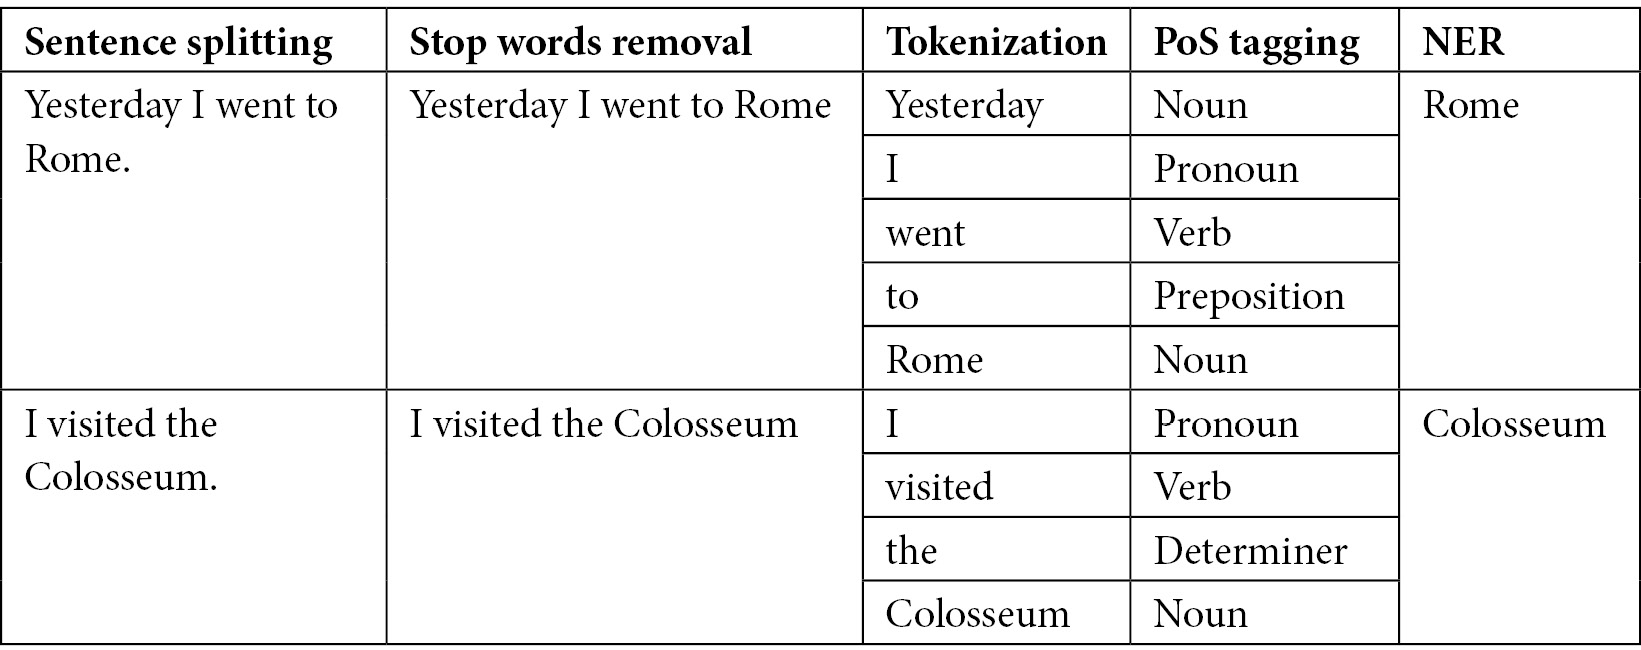 Figure 9.2 – A part of the NLP workflow for the text “Yesterday I went to Rome. I visited the Colosseum."
